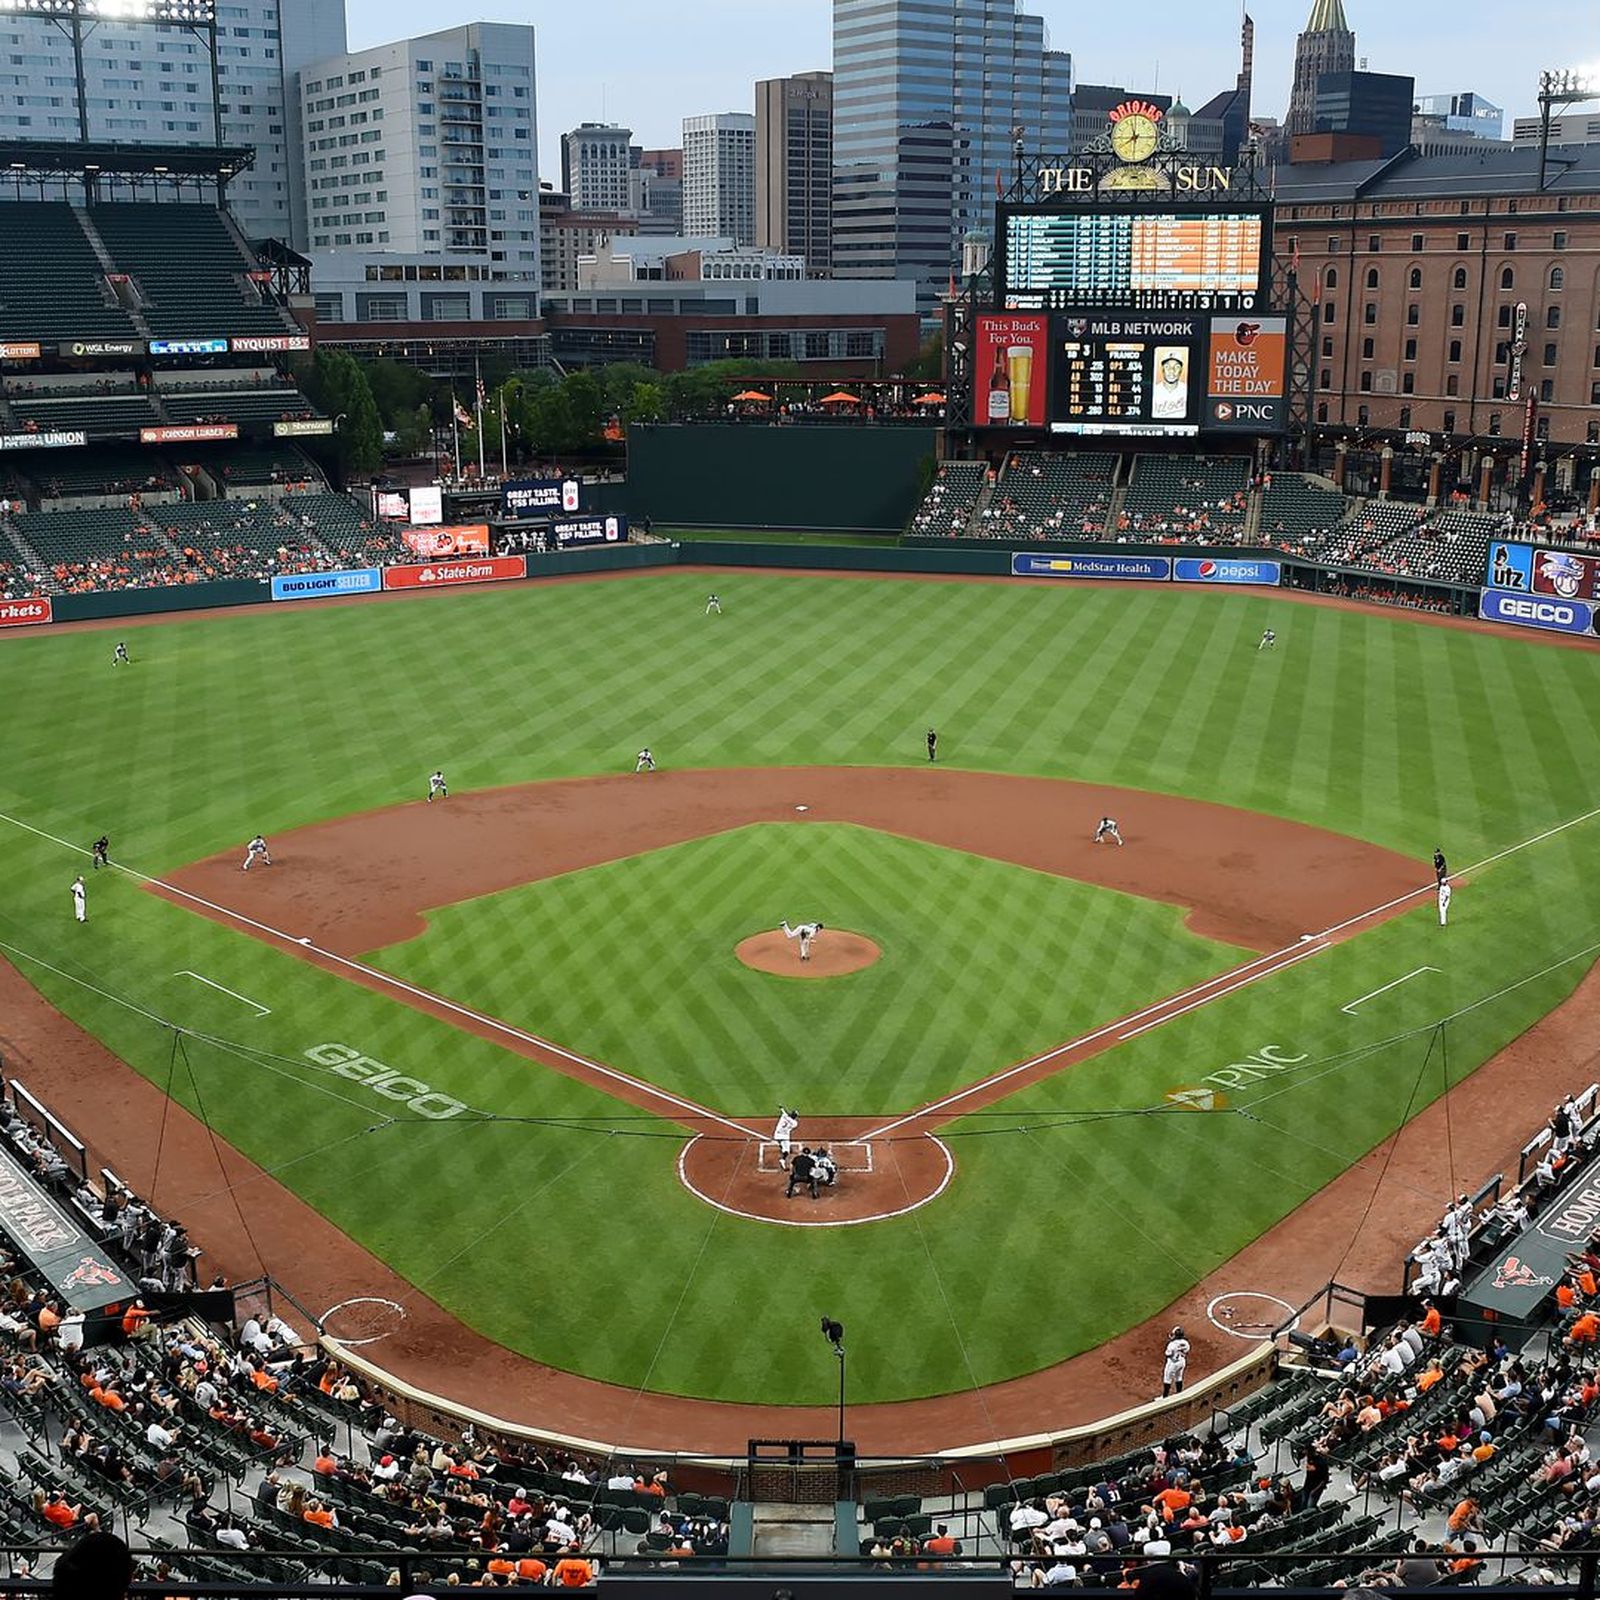 Going to Camden Yards is fun this year